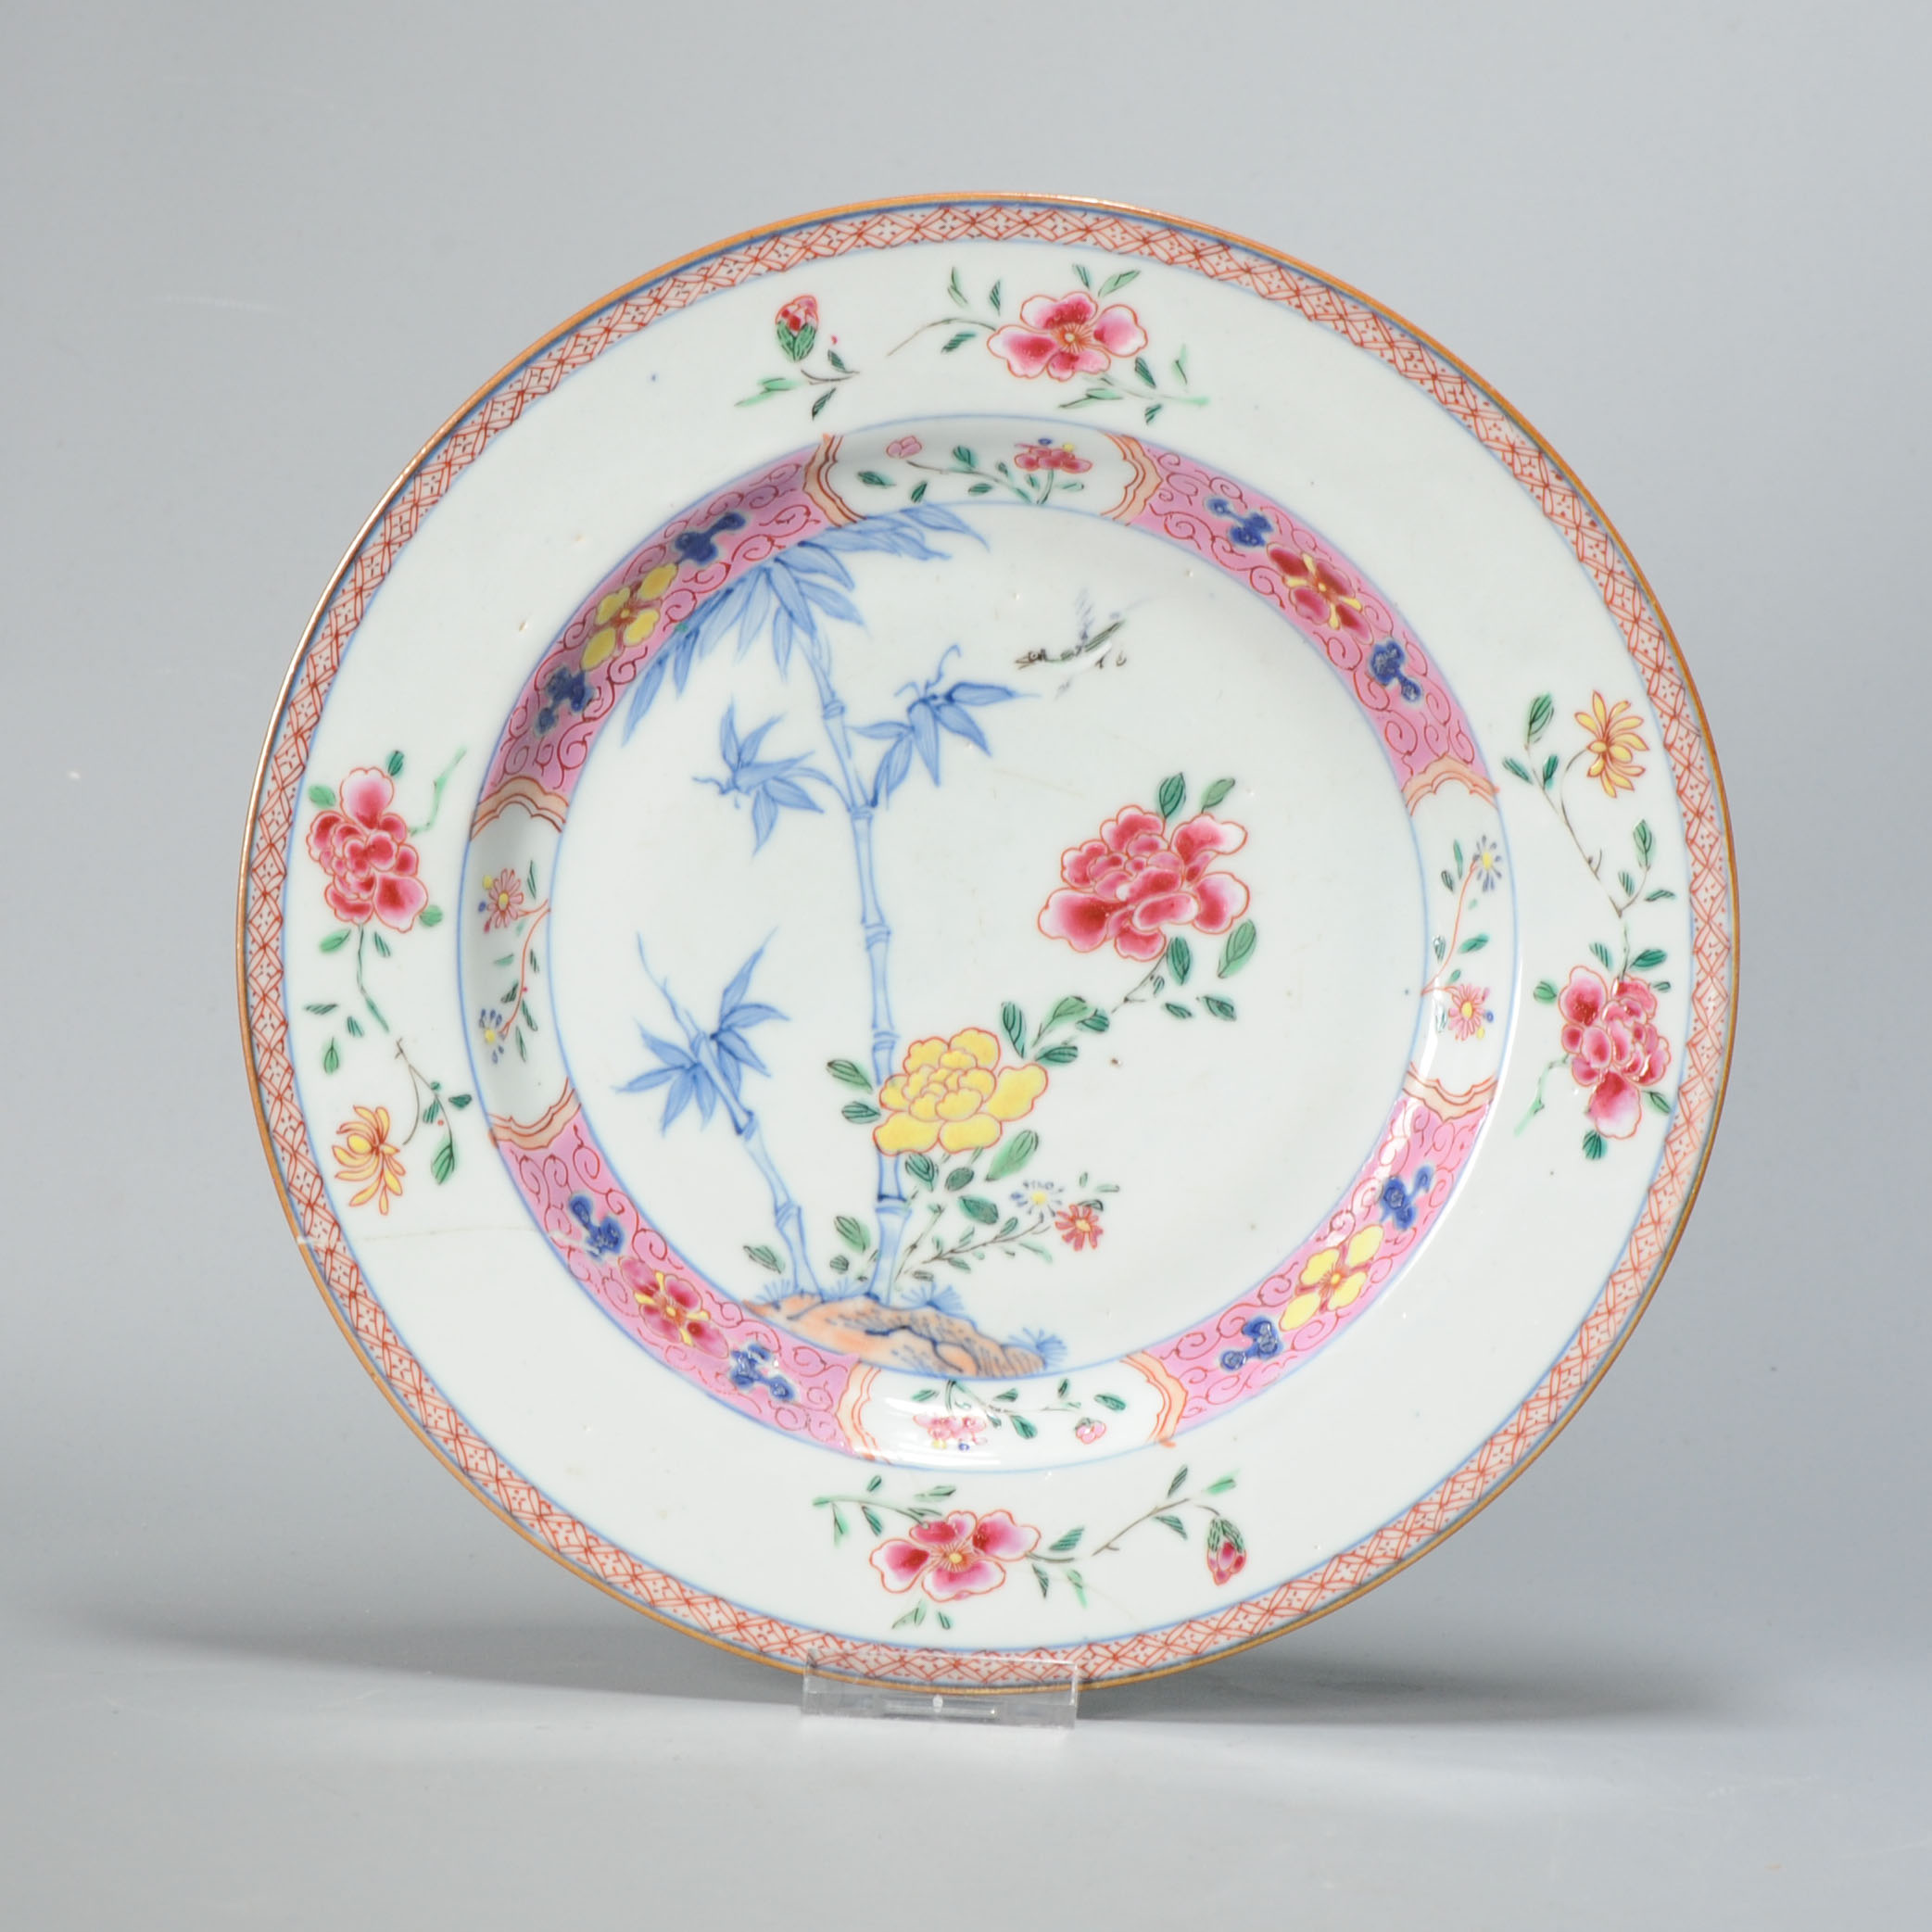 0975 A very nicely painted Famille Rose plate with underglaze blue